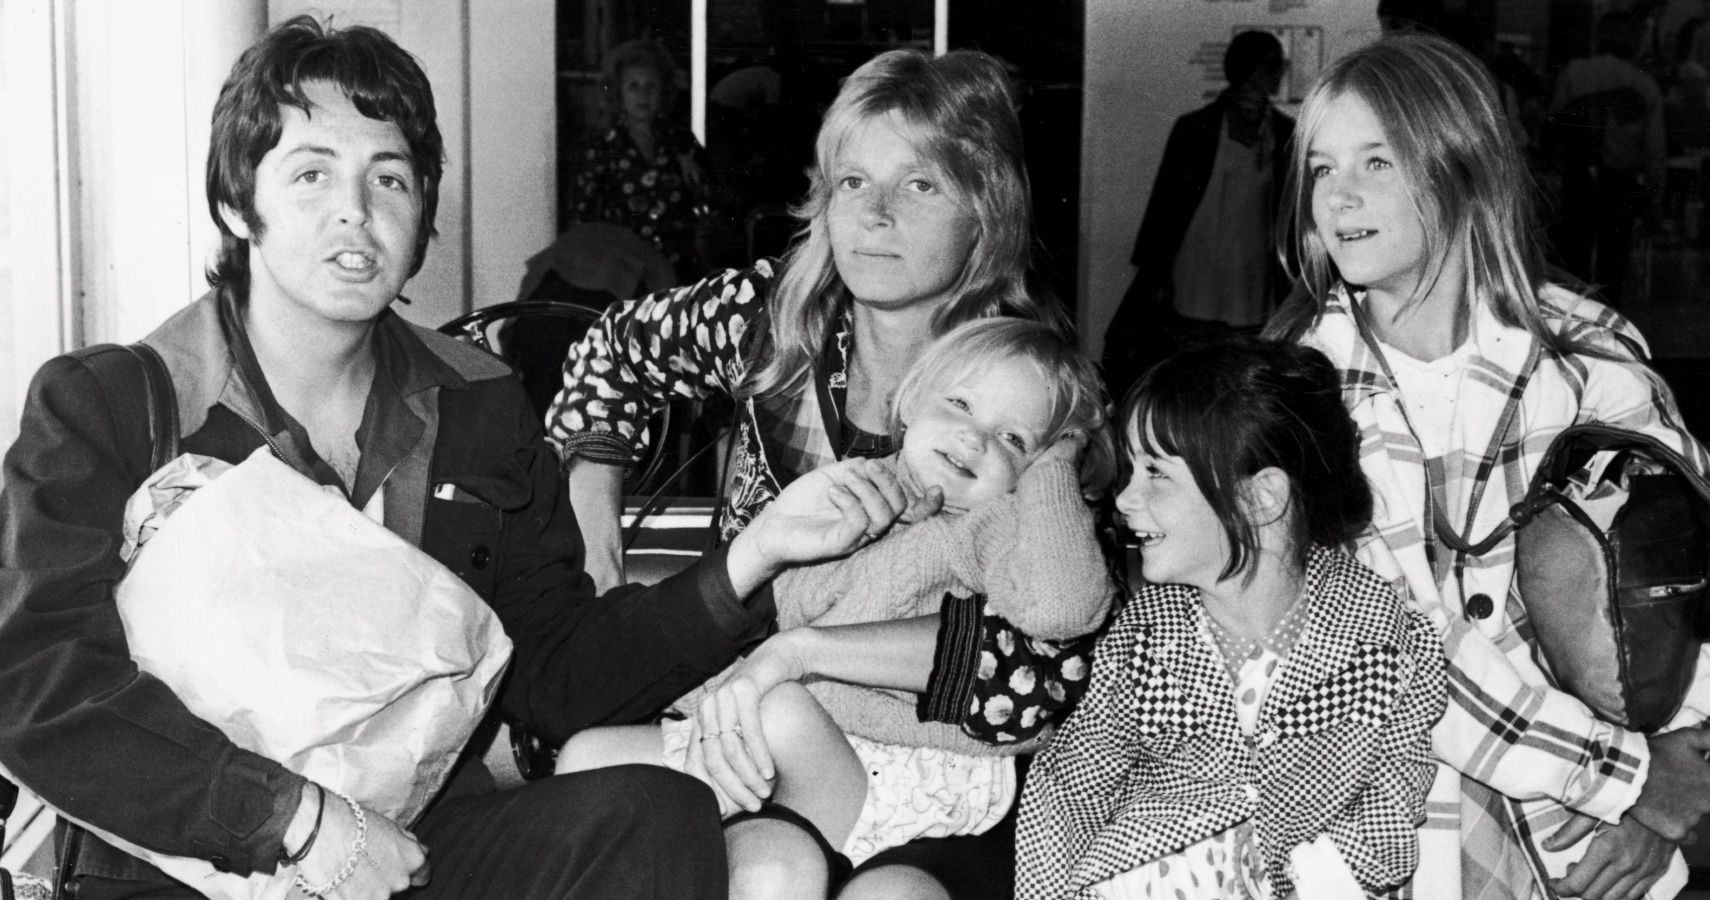 Paul McCartney and his wife and kids